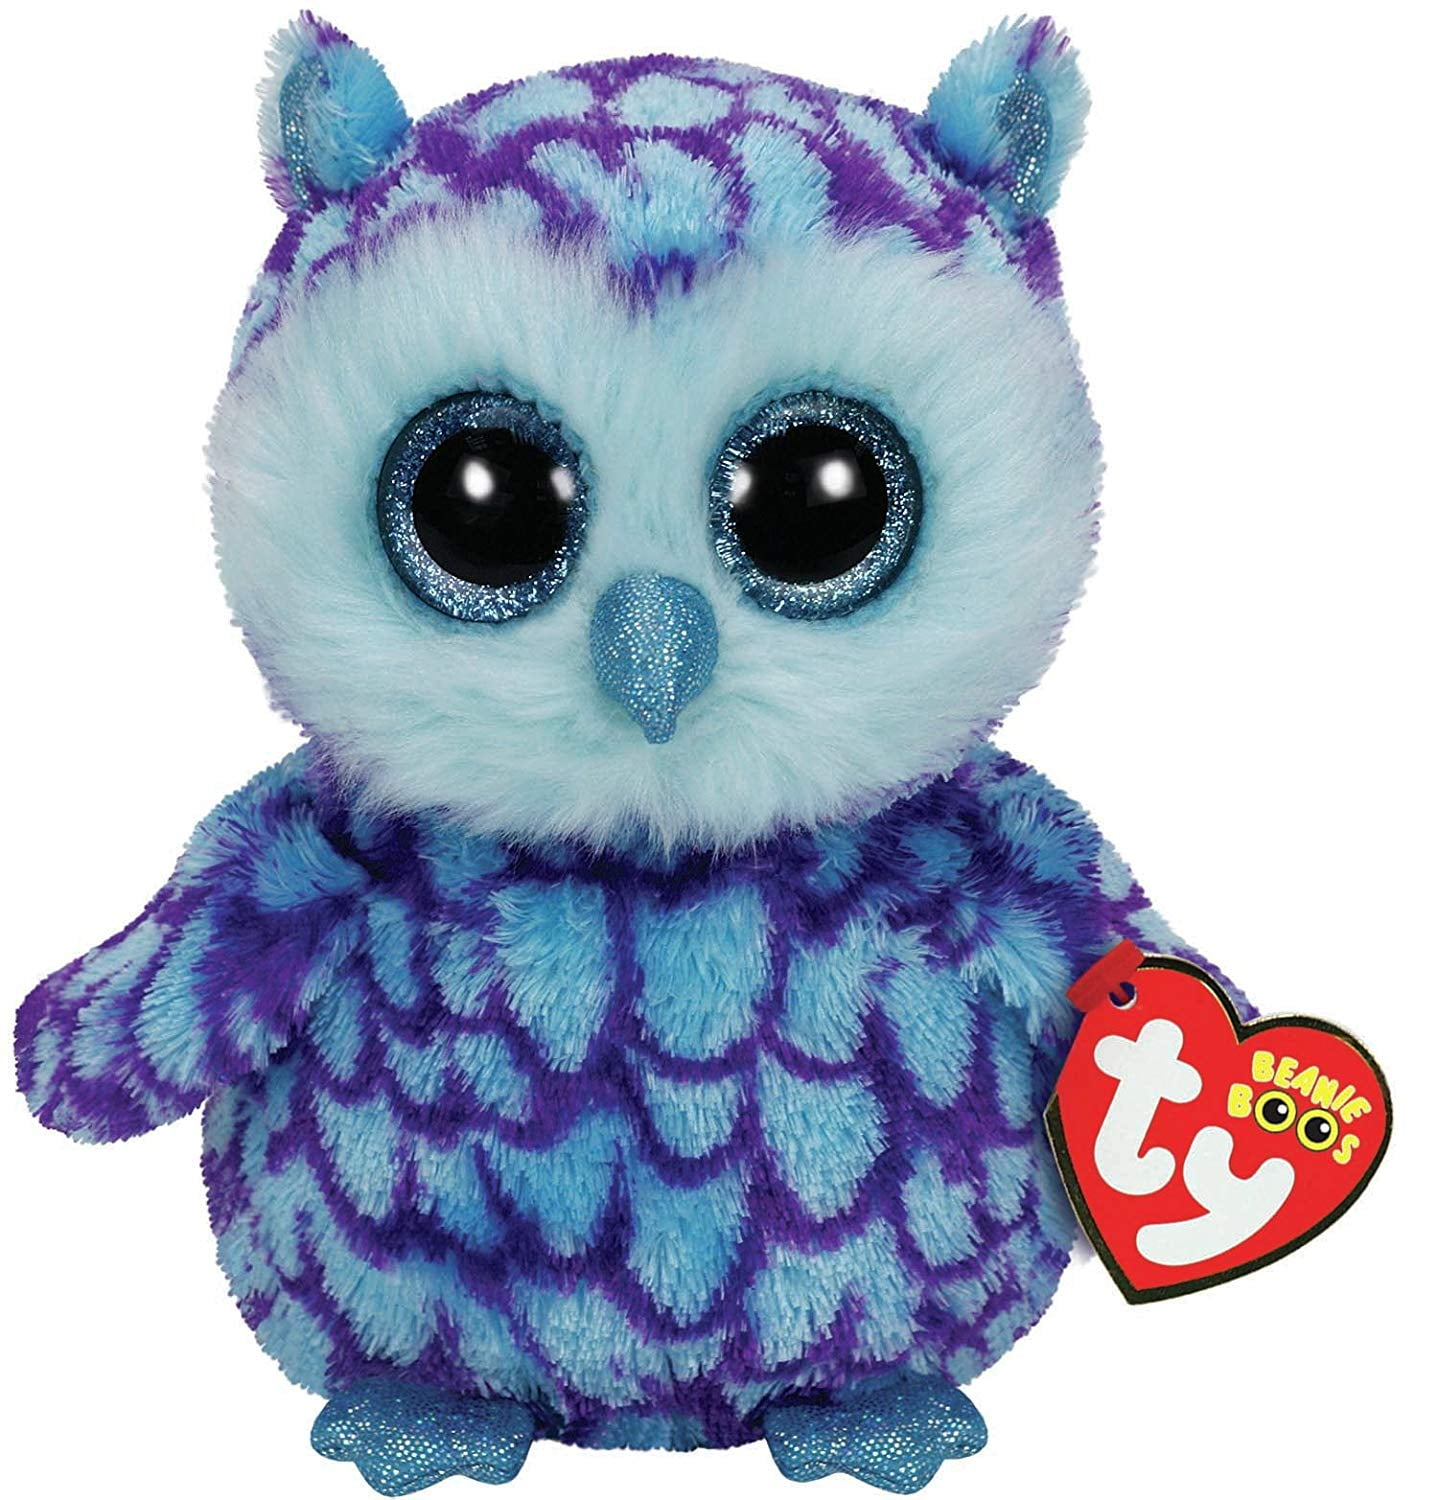 TY BEANIE BABIES BOOS TWIGGY PINK OWL PLUSH SOFT TOY NEW WITH TAGS 